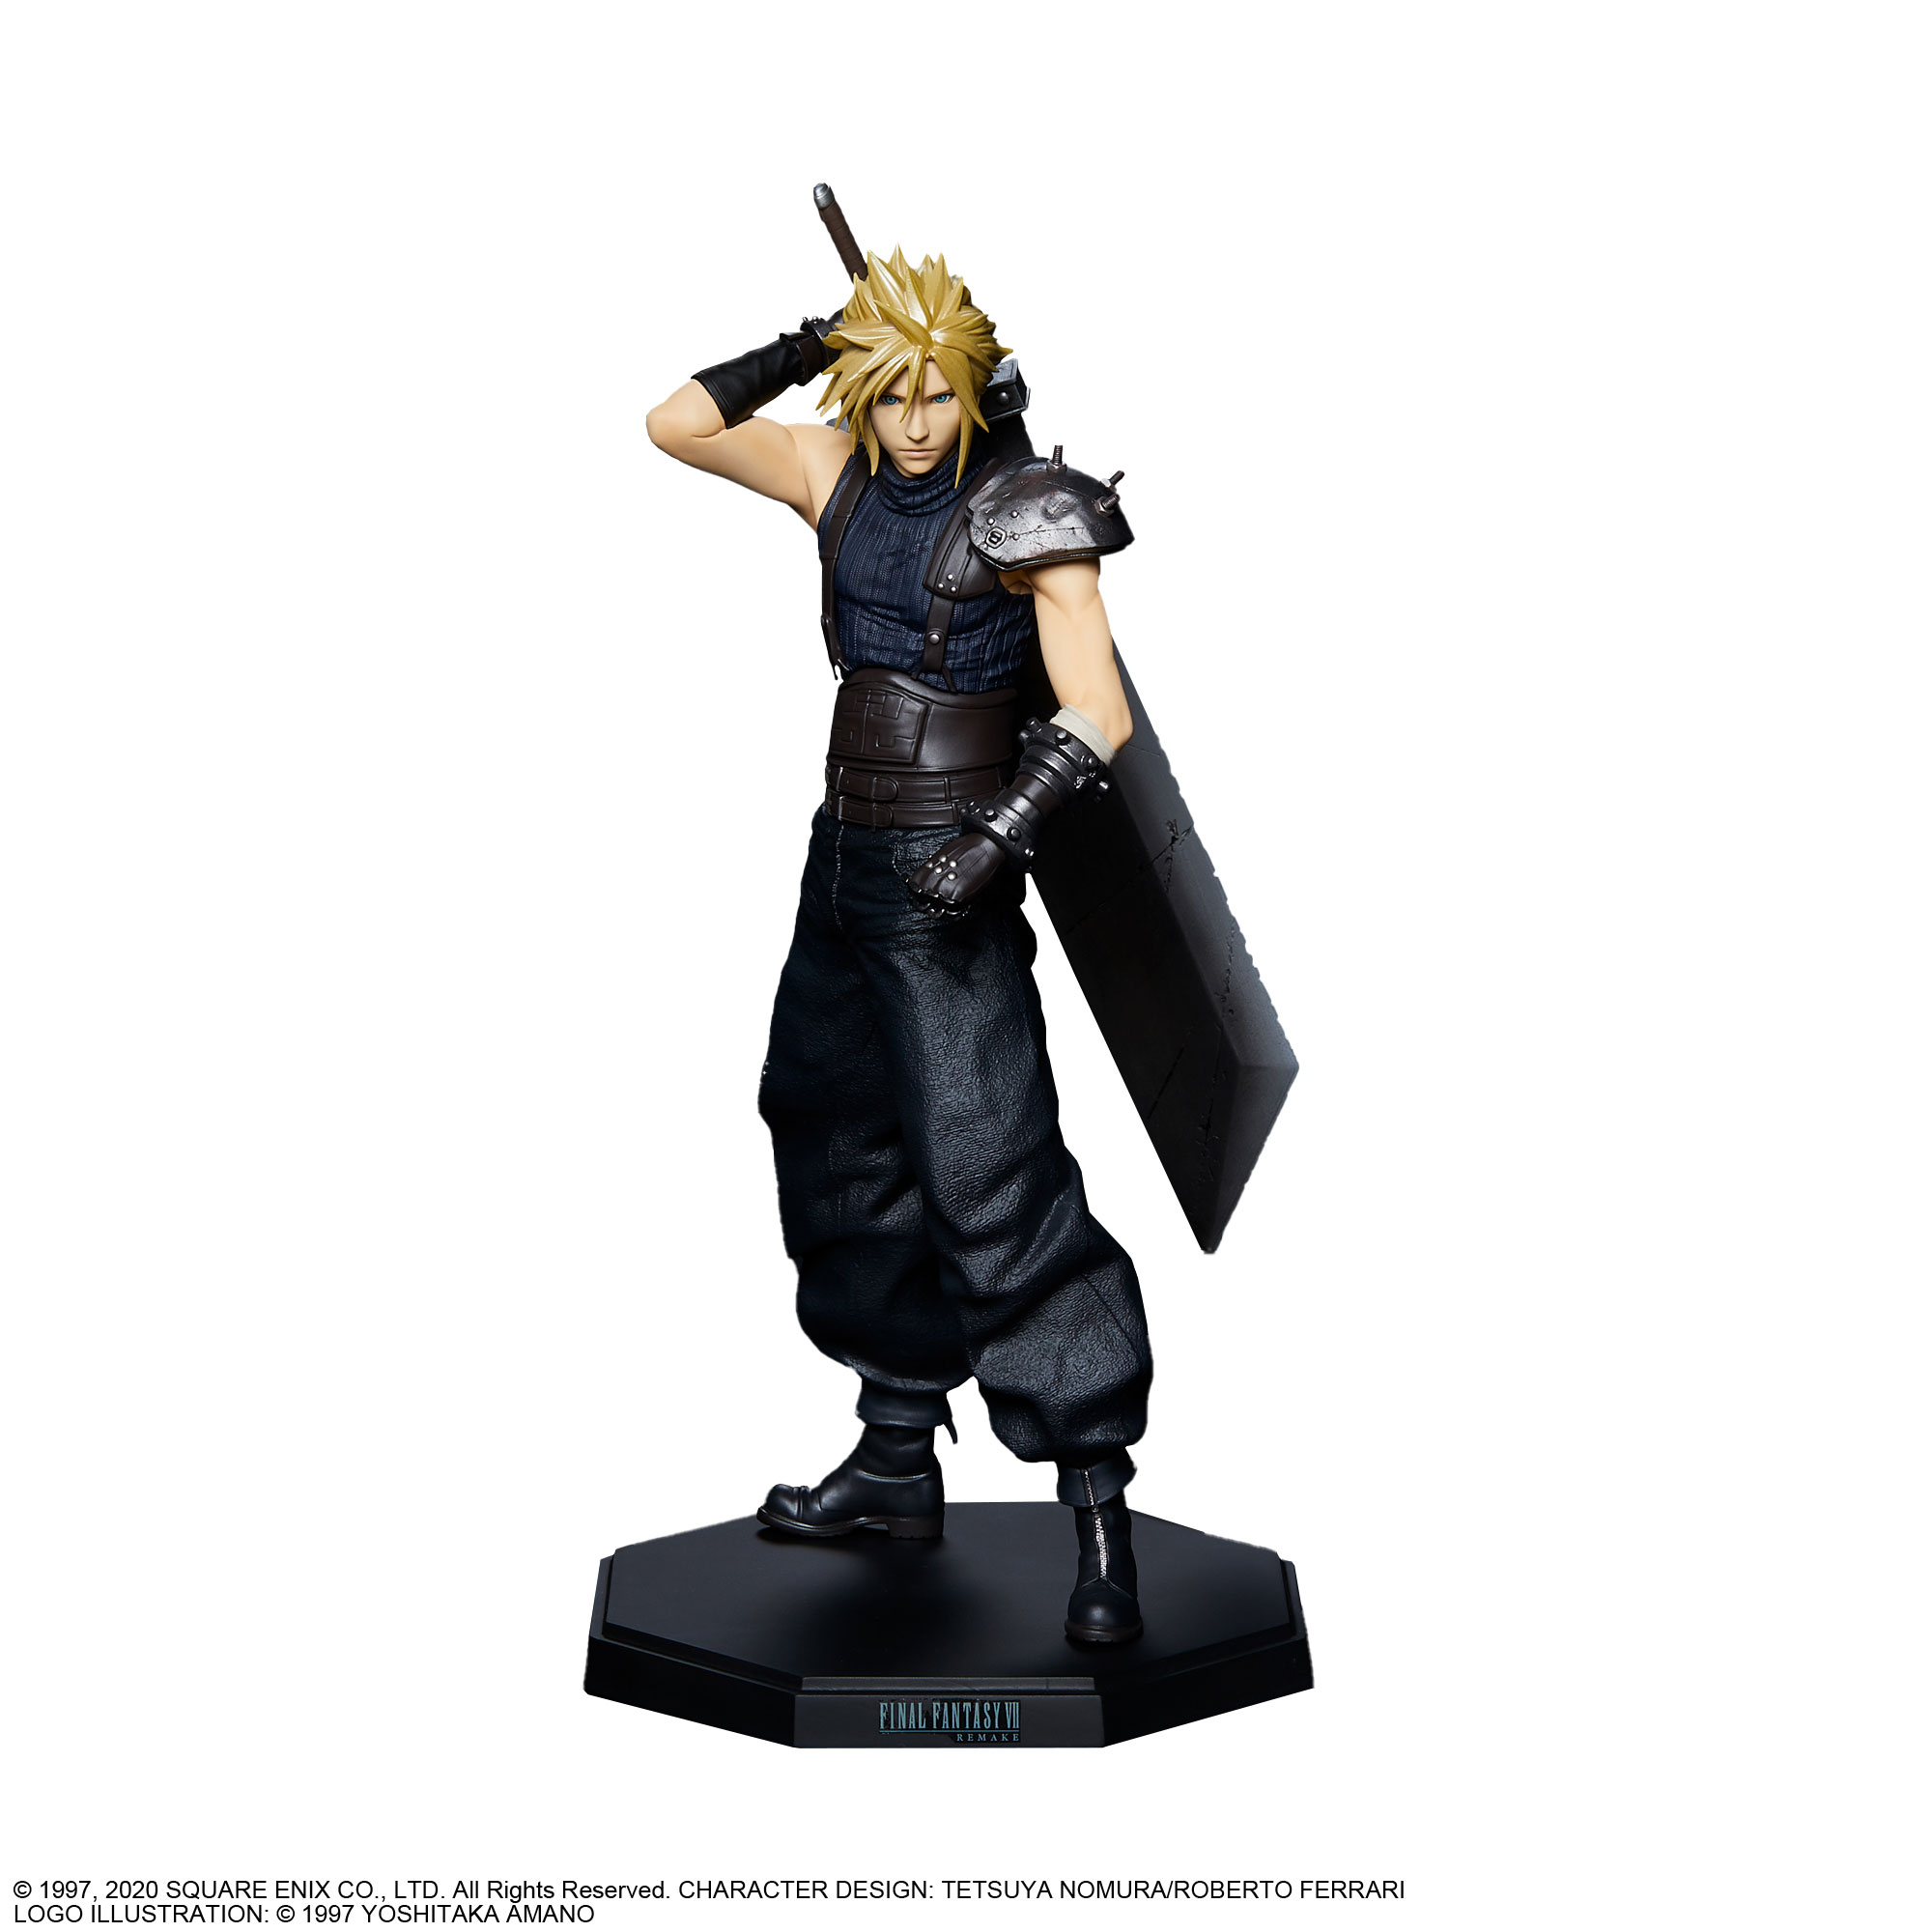 Details about   Play Arts PA Final Fantasy 6 FF Tina Branford Action Figure In Stock NOT BOX 